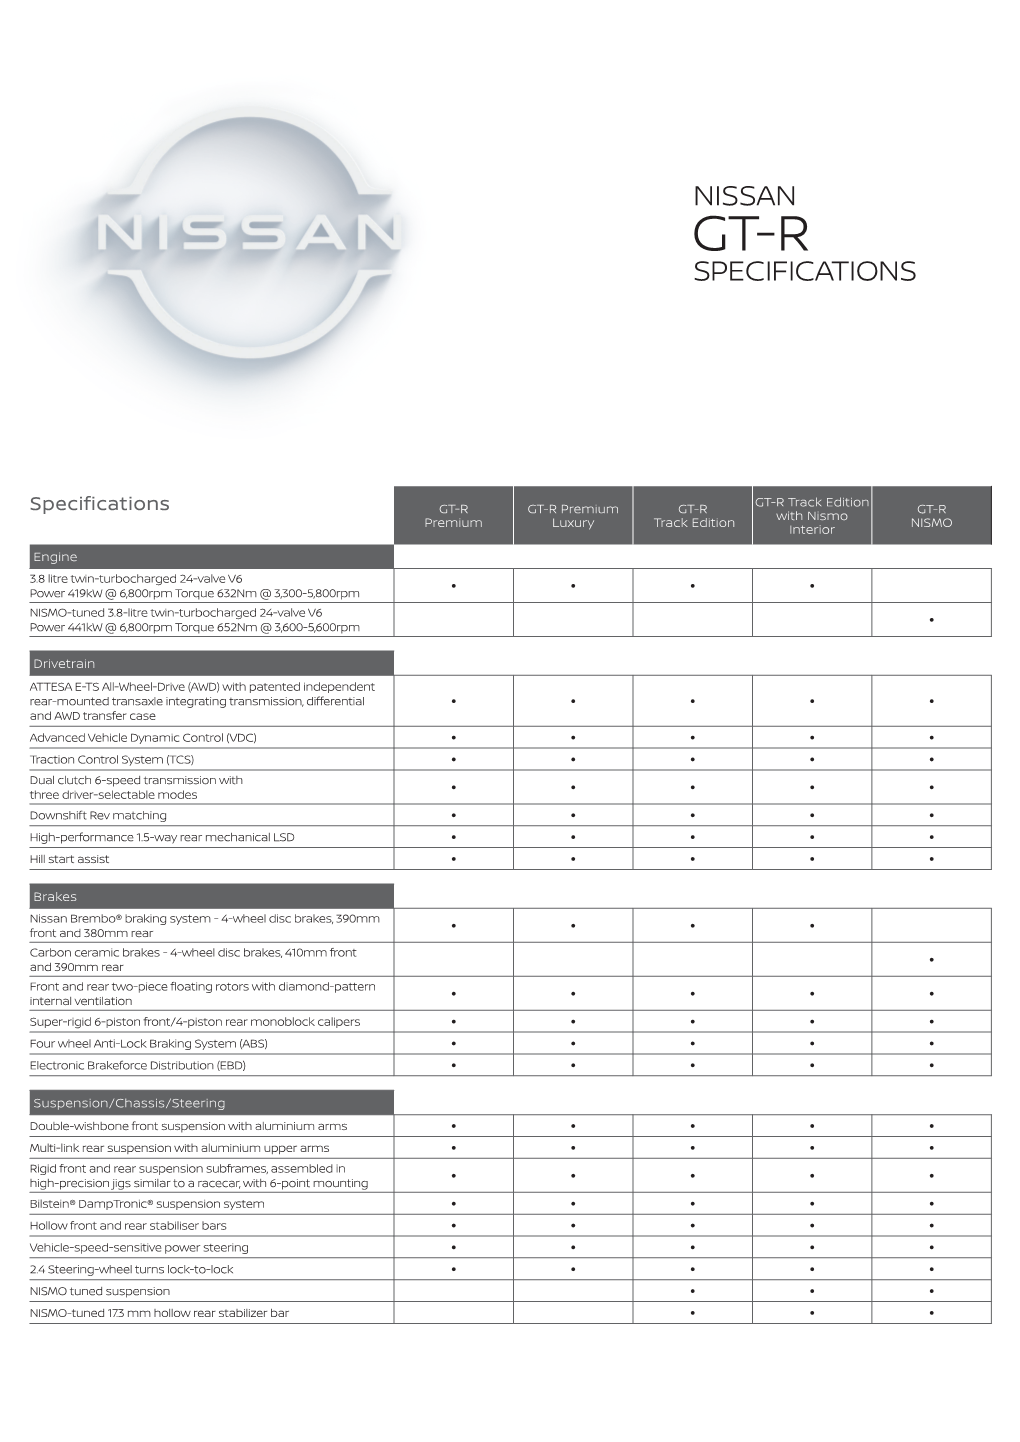 Nissan Gt-R Specifications